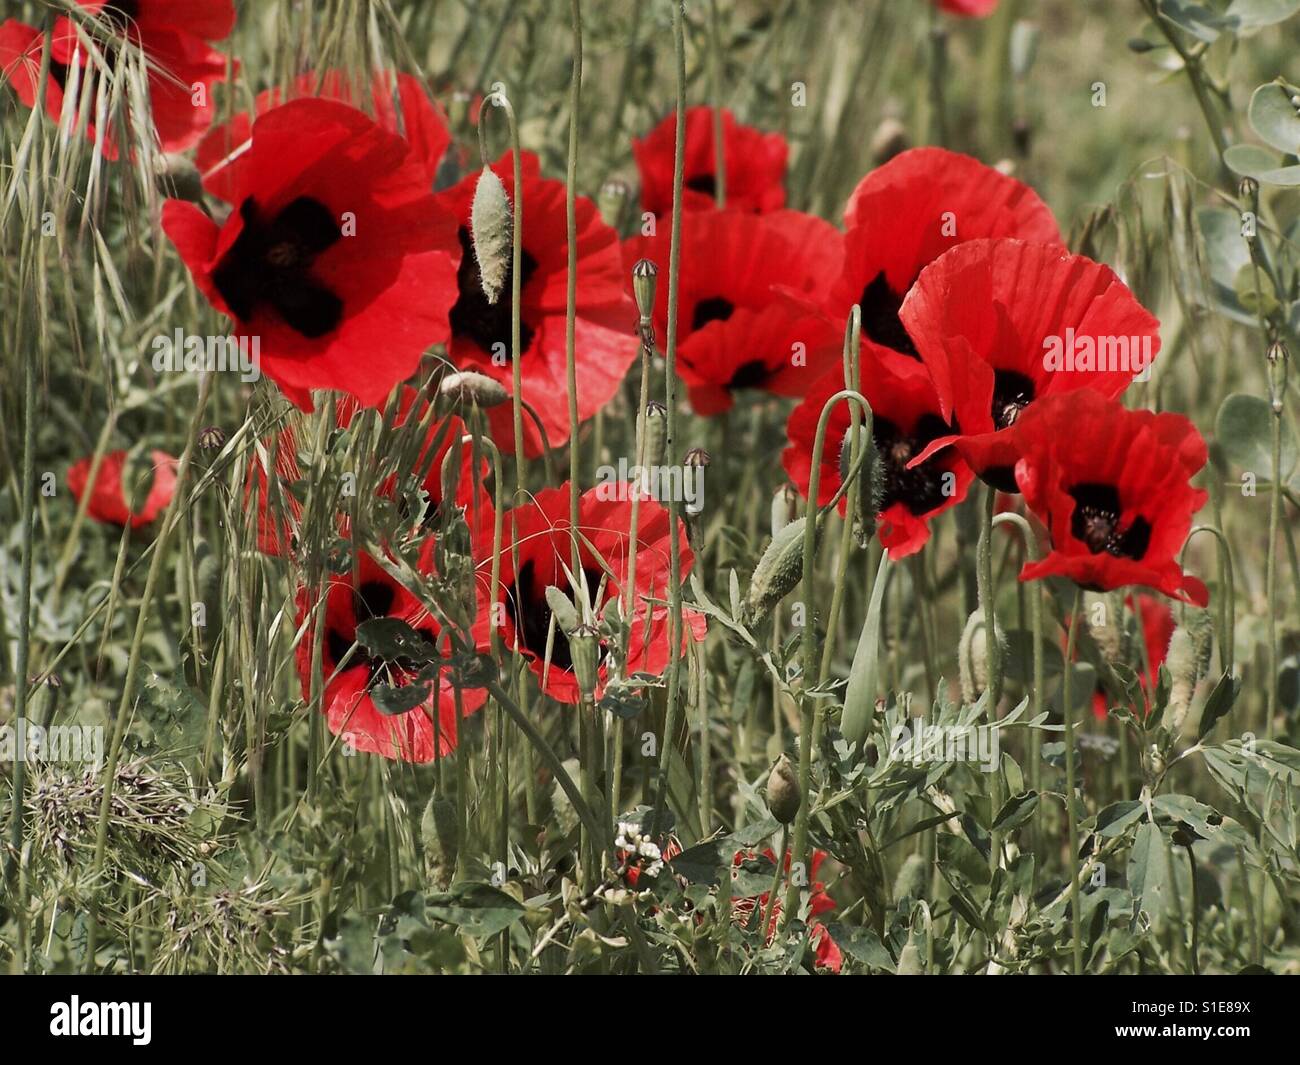 Poppies in tall grass Stock Photo